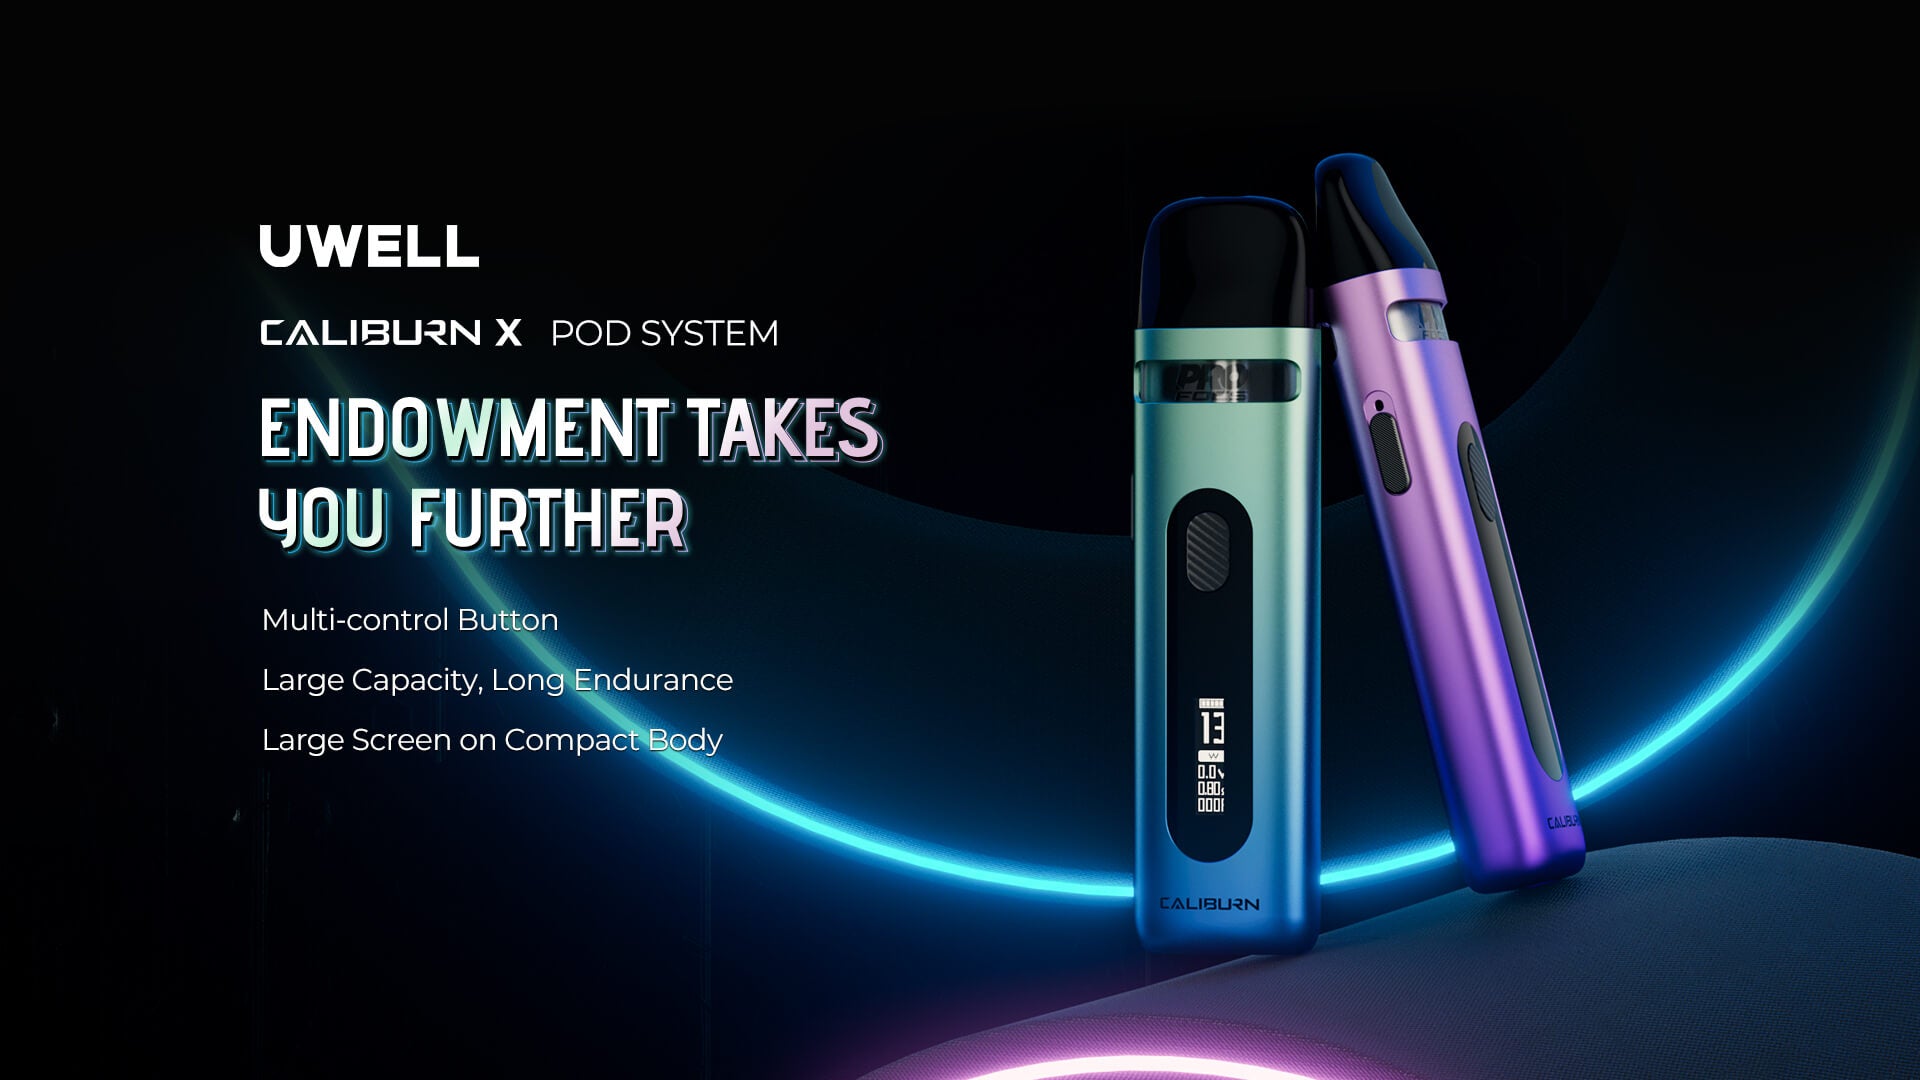 Uwell Caliburn X Pod System | 'Endowment takes you further'